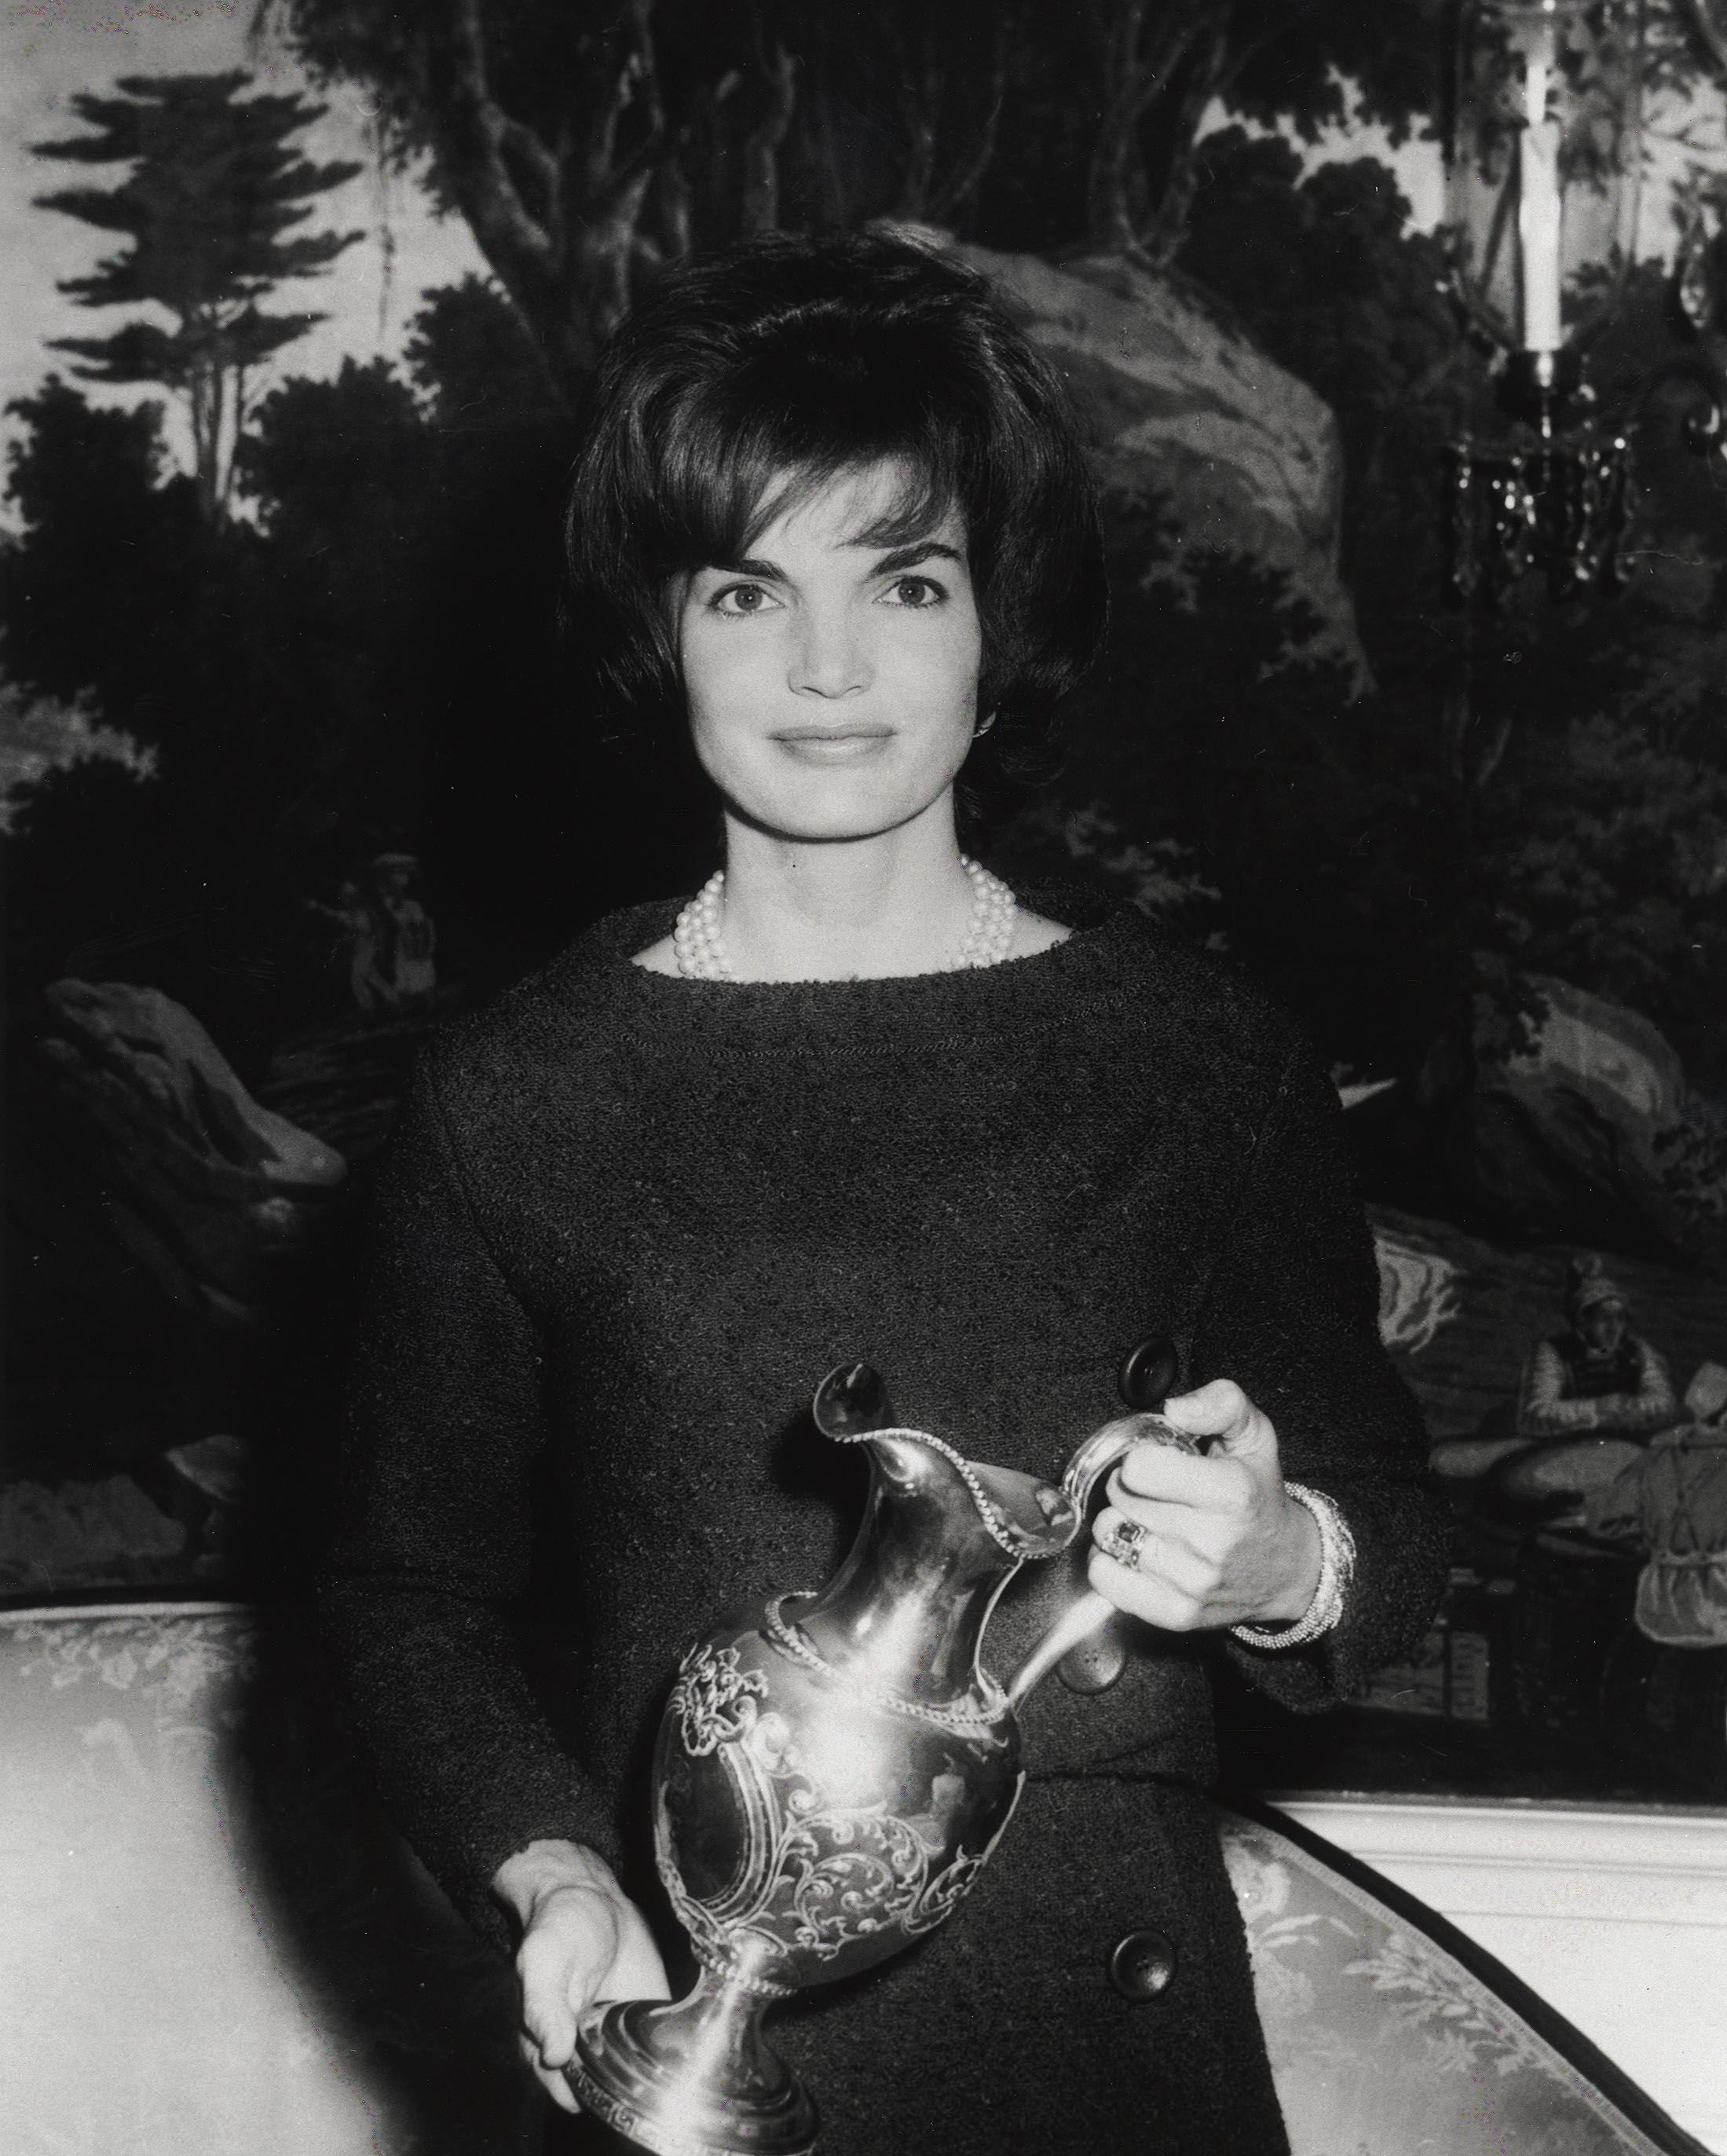 First Lady Jacqueline Kennedy poses for a photograph while holding a gift on December 12, 1961, at the White House in Washington D.C. | Source: Getty Images